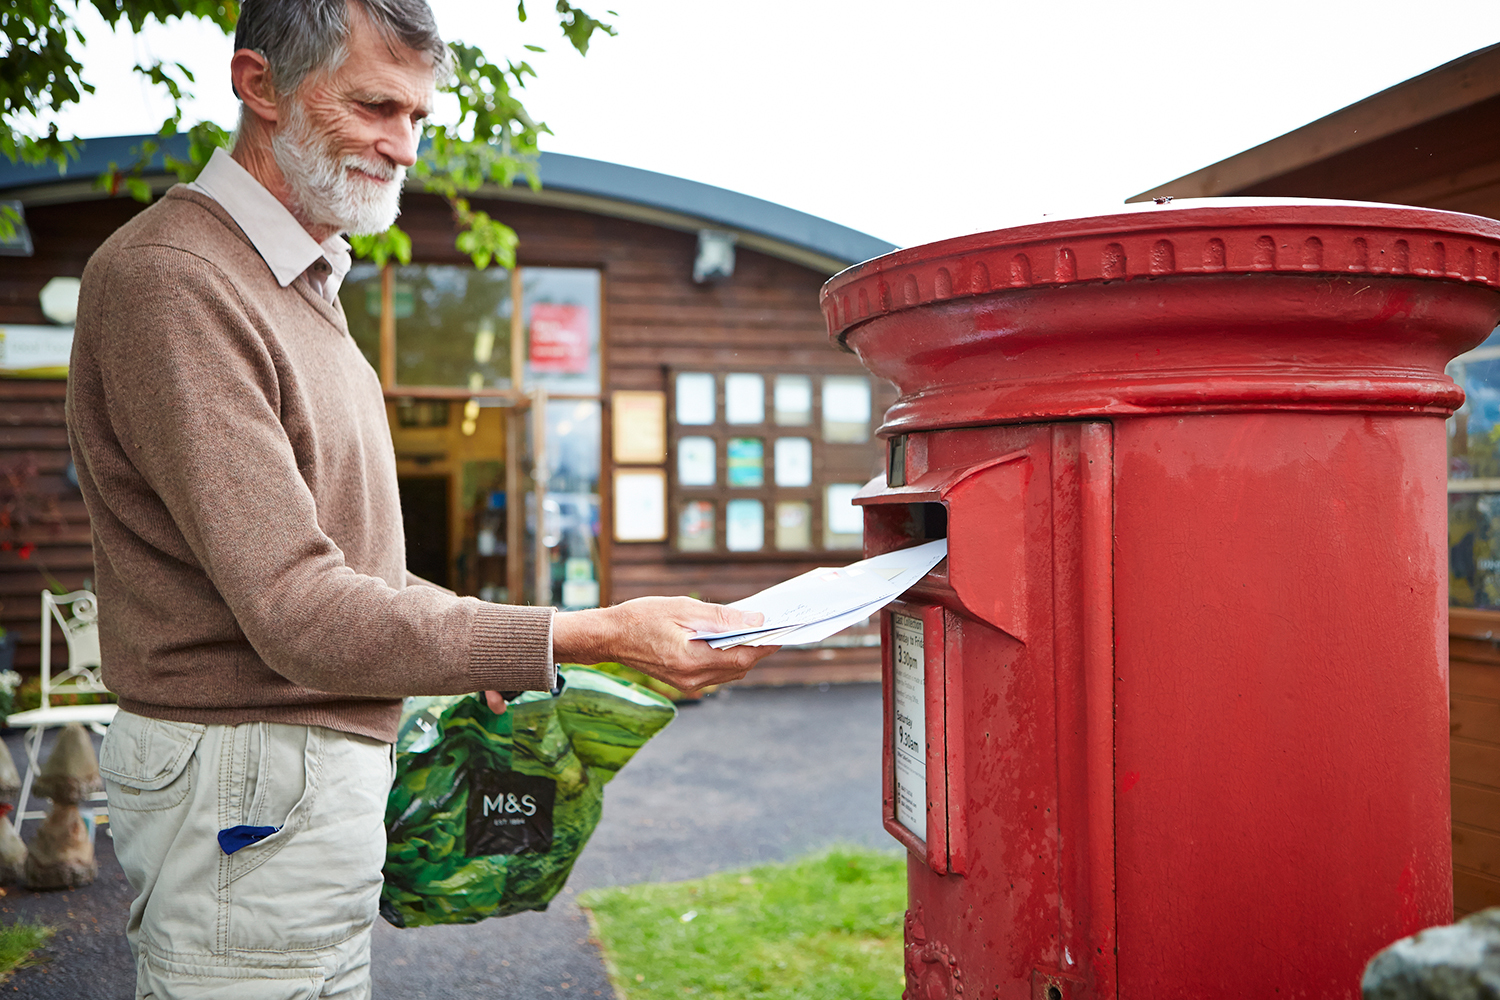 The Hopes of Longtown post office opened in 2003 